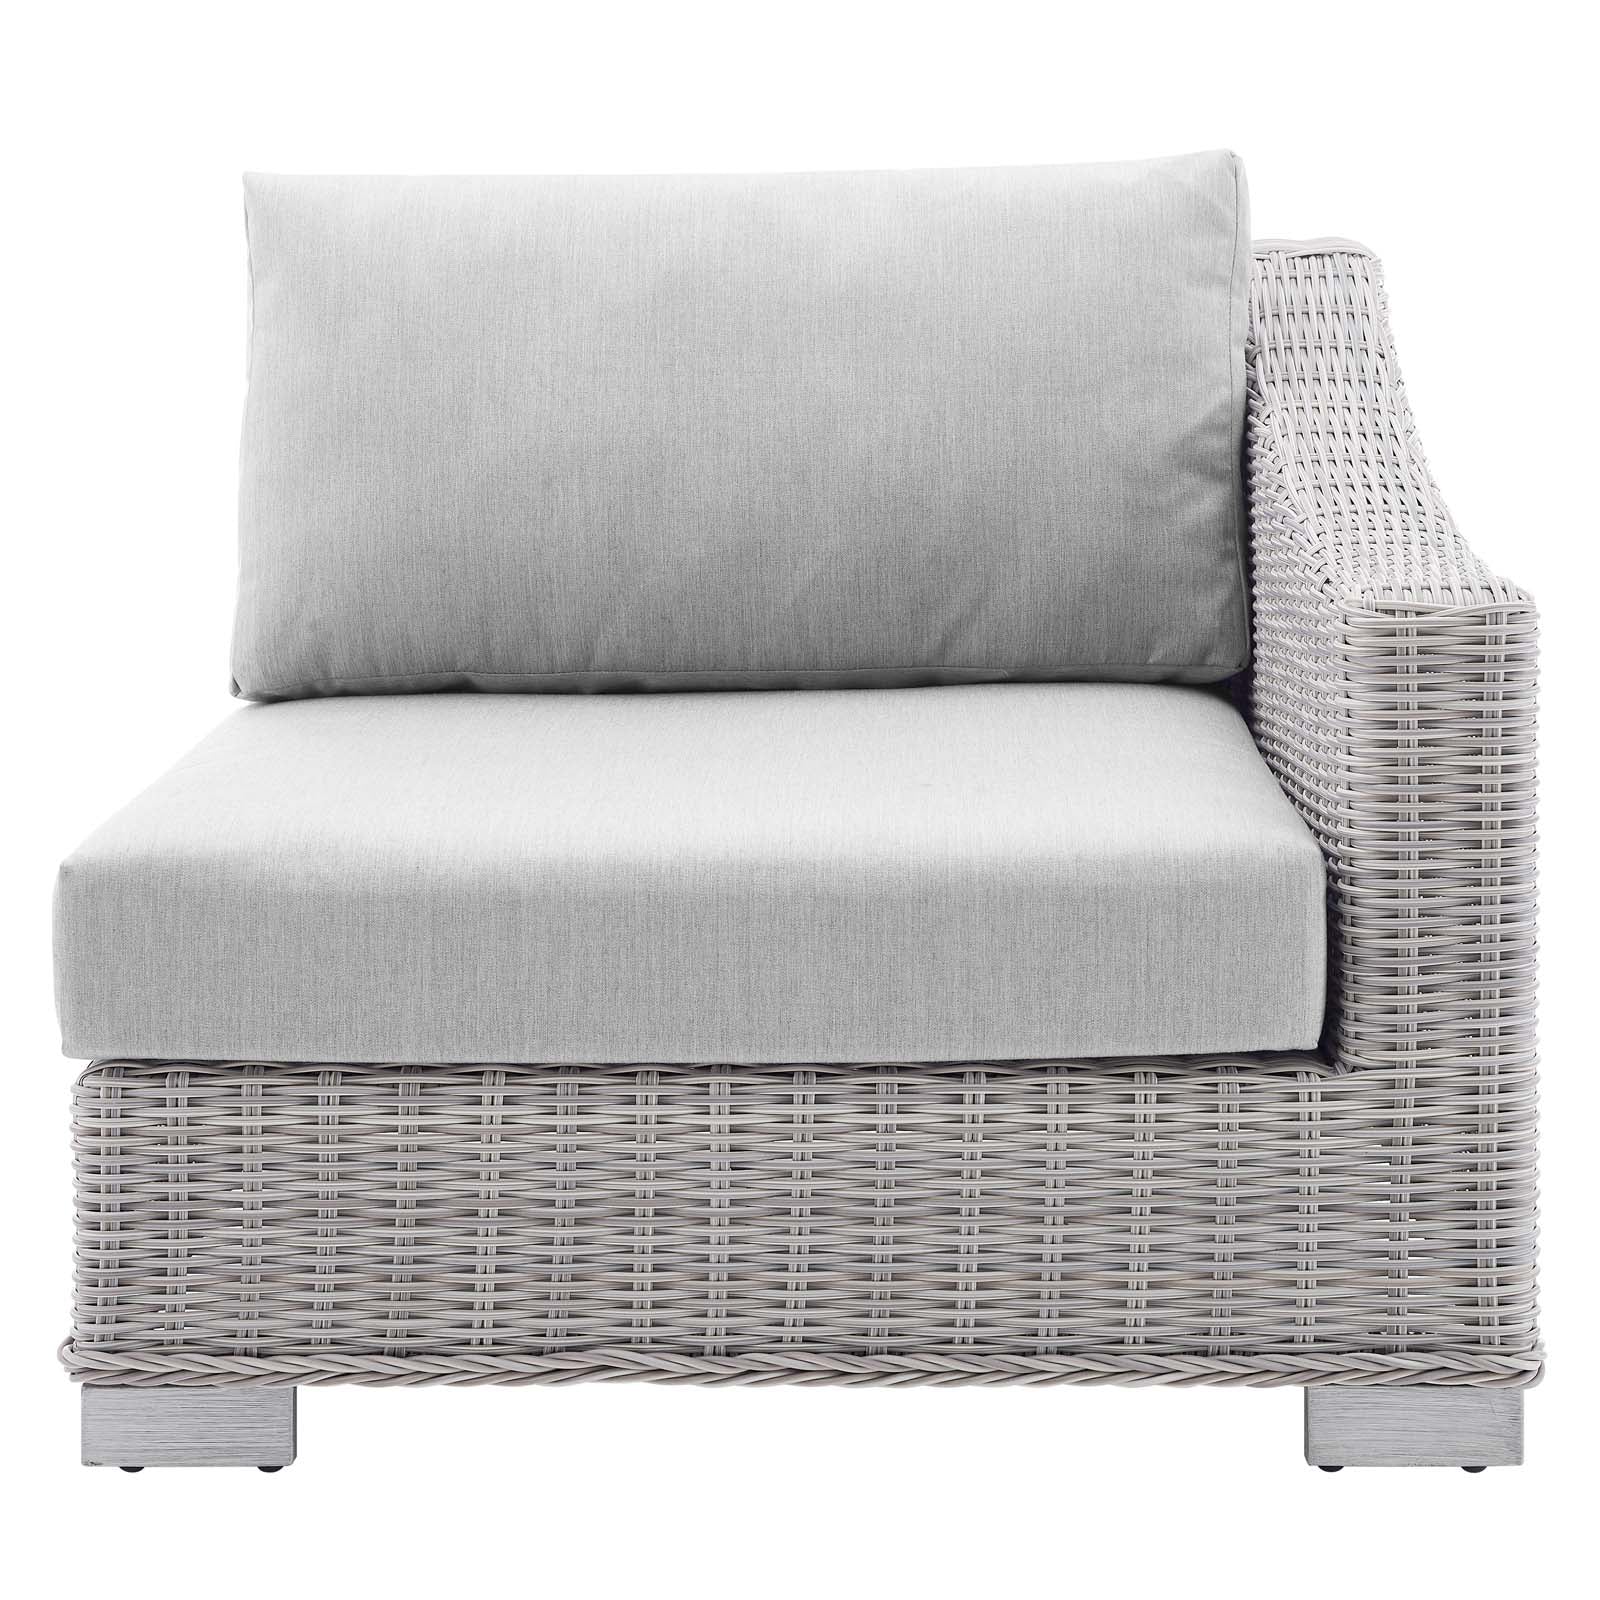 Modway Outdoor Chairs - Conway Sunbrella Outdoor Patio Wicker Rattan Right-Arm Chair Light Gray